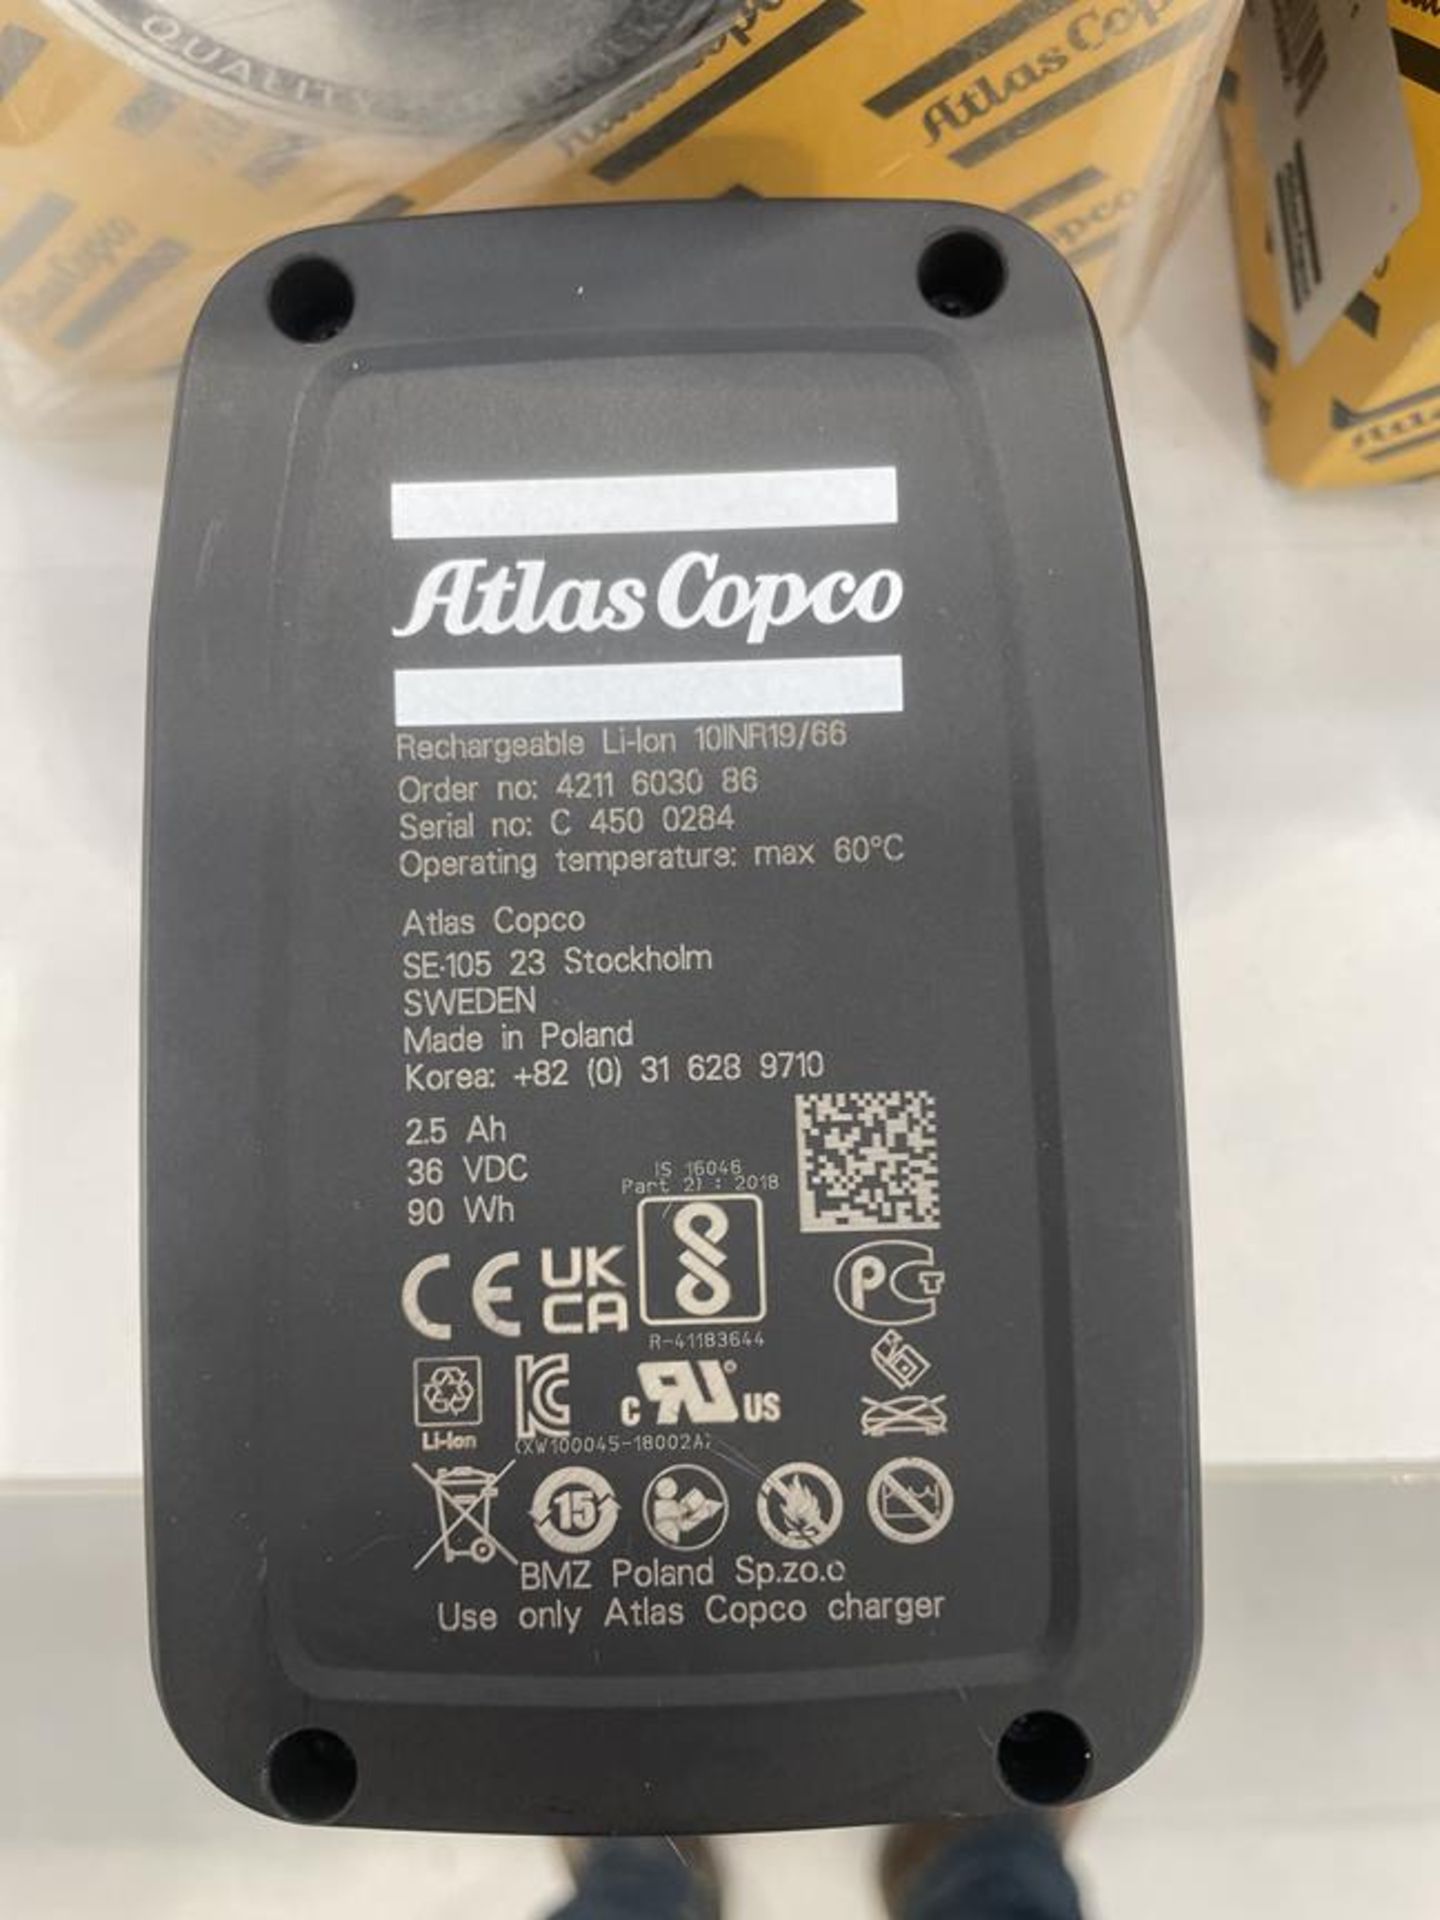 4x (no.) Atlas Copco, rechargeable batteries, 36v/2.5 amp with dust cover - Image 3 of 3